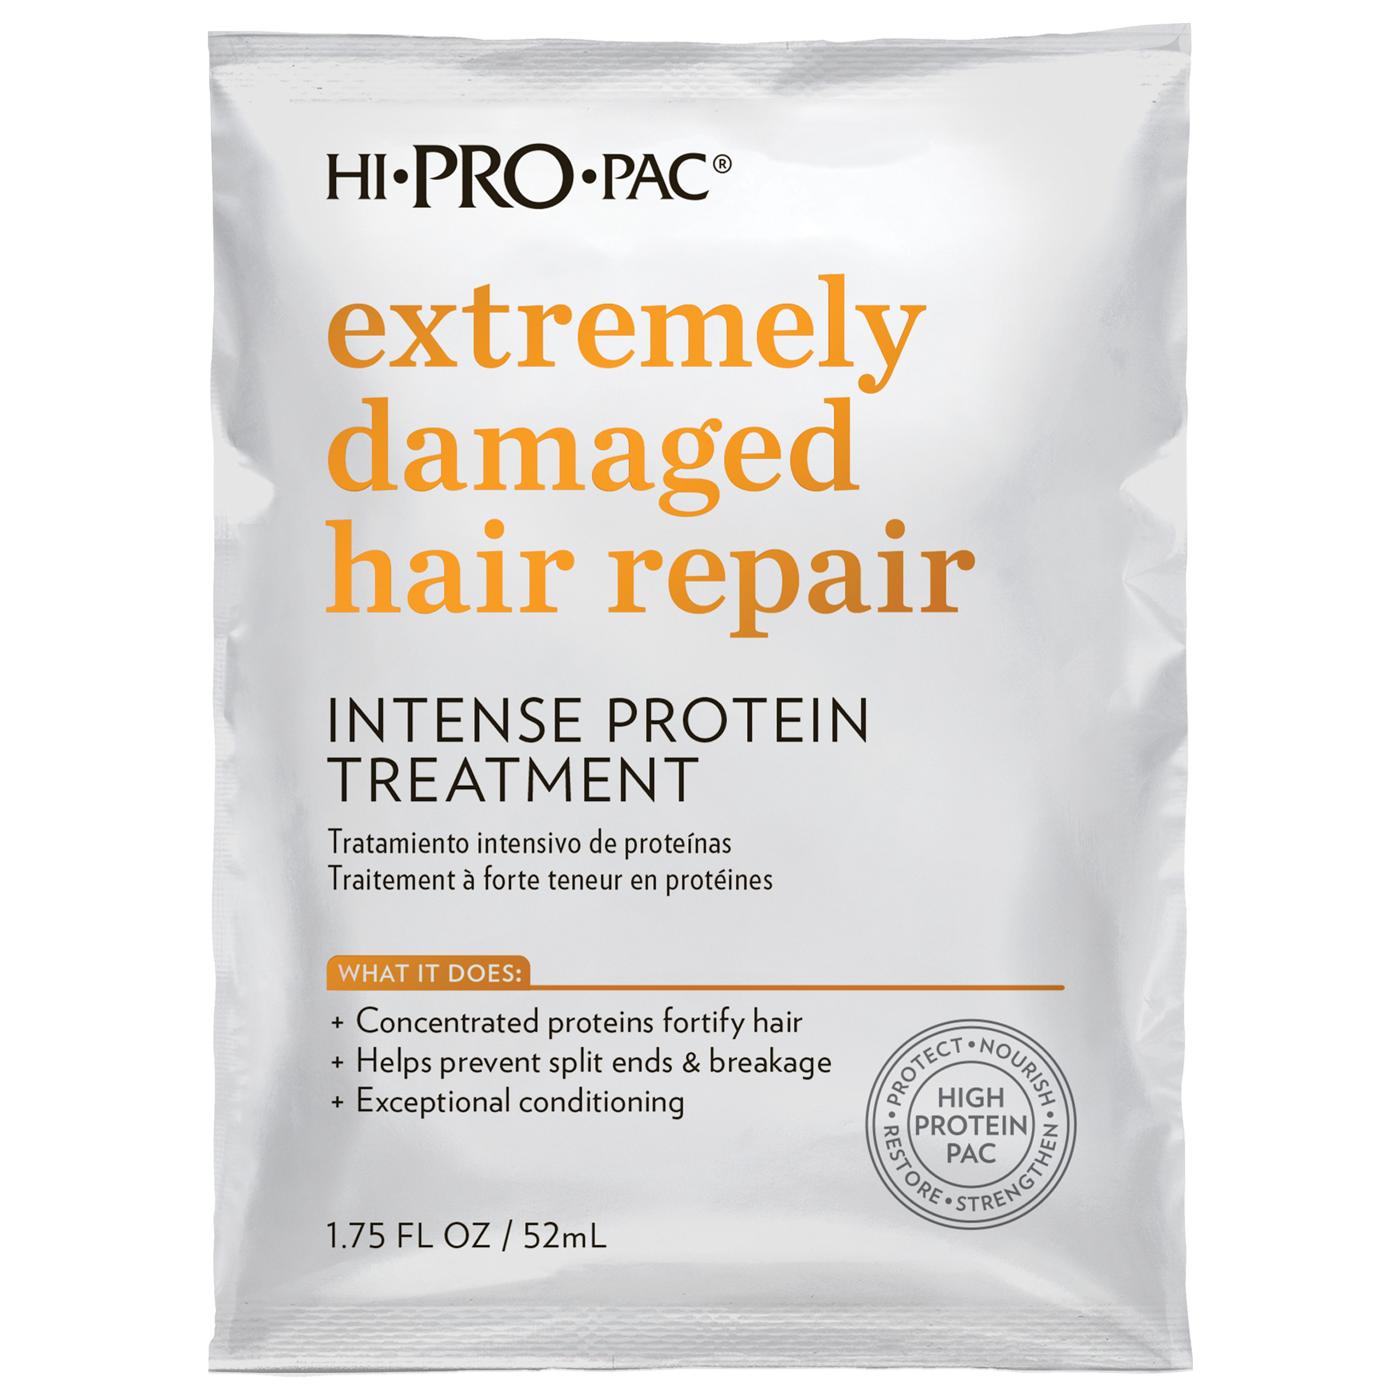 Hi Pro Pac Extremely Damaged Hair Repair Intense Protein Treatment; image 1 of 2